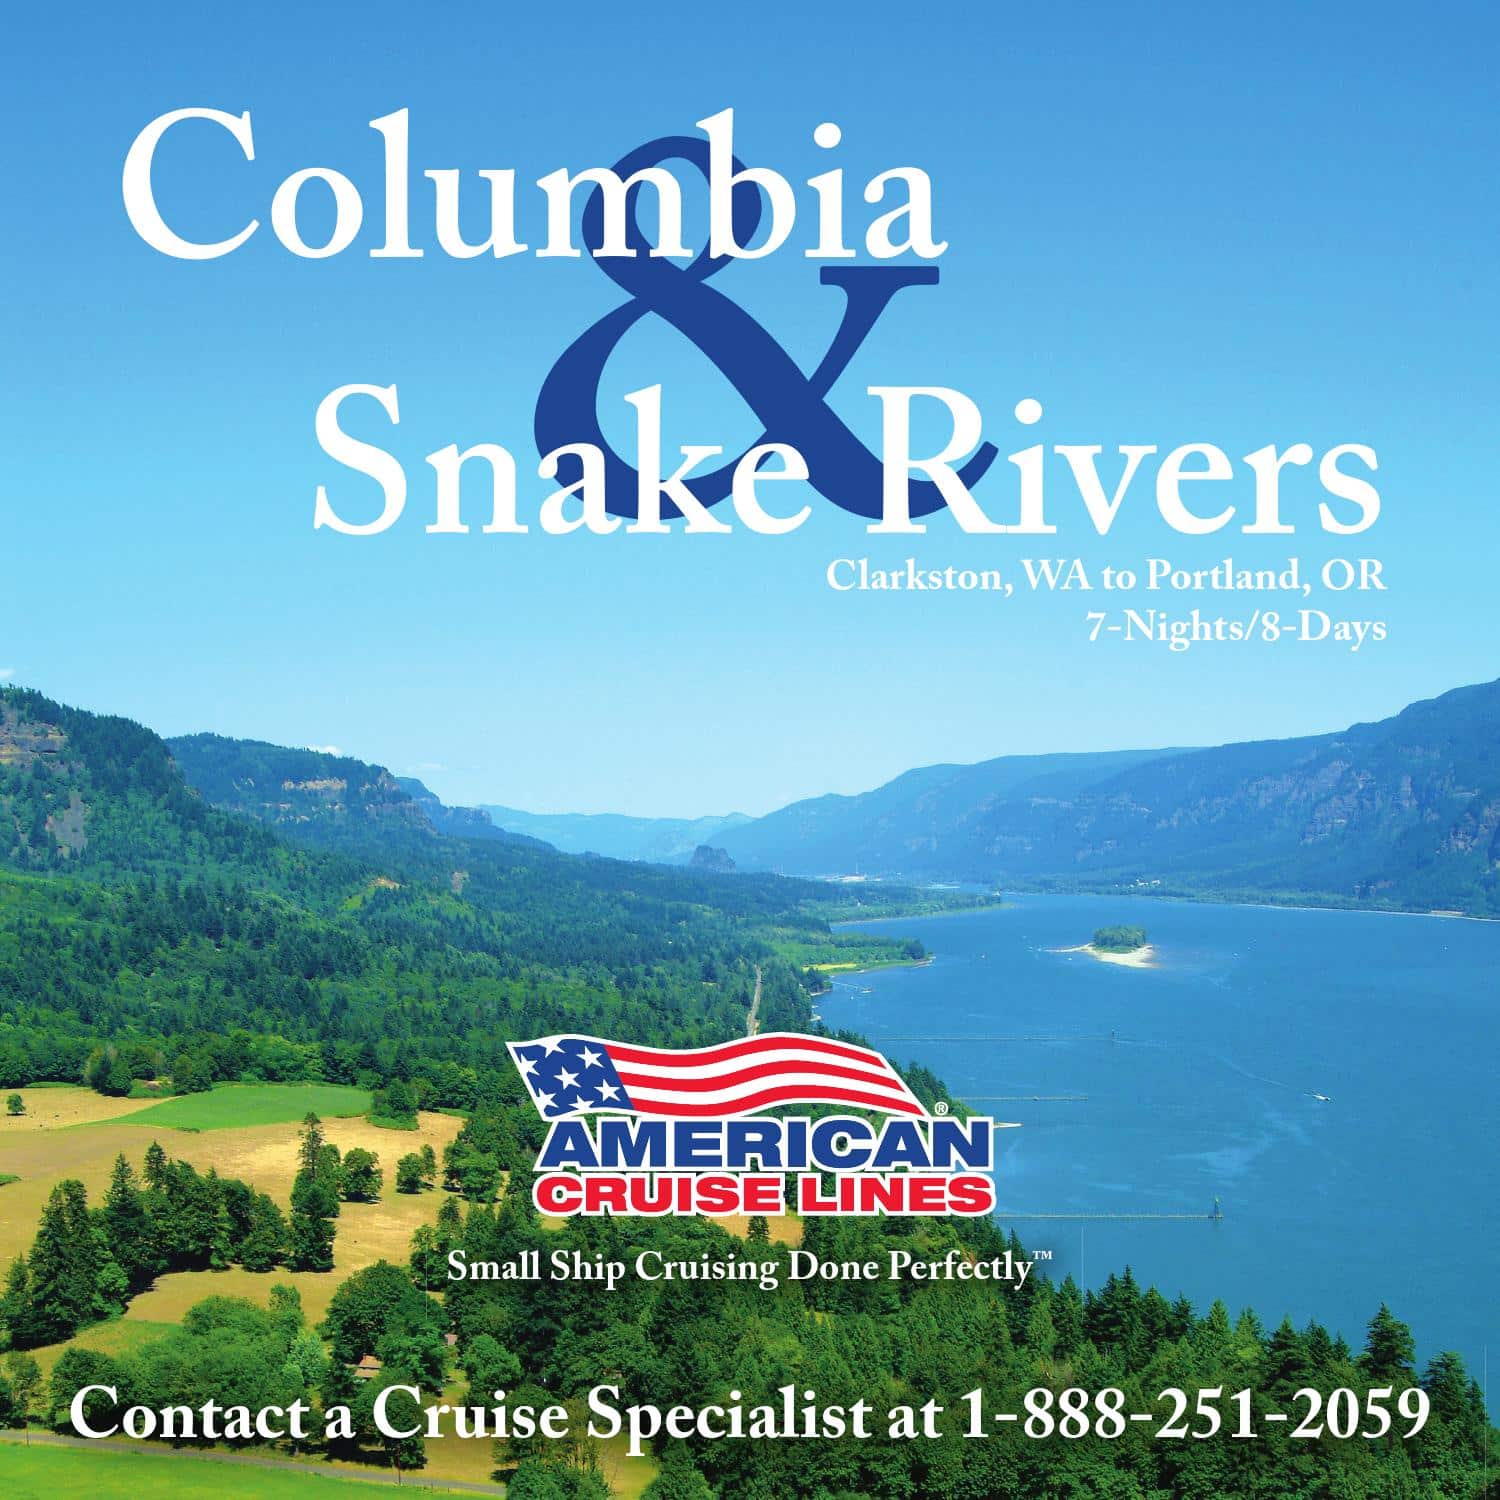 Columbia and Snake Rivers